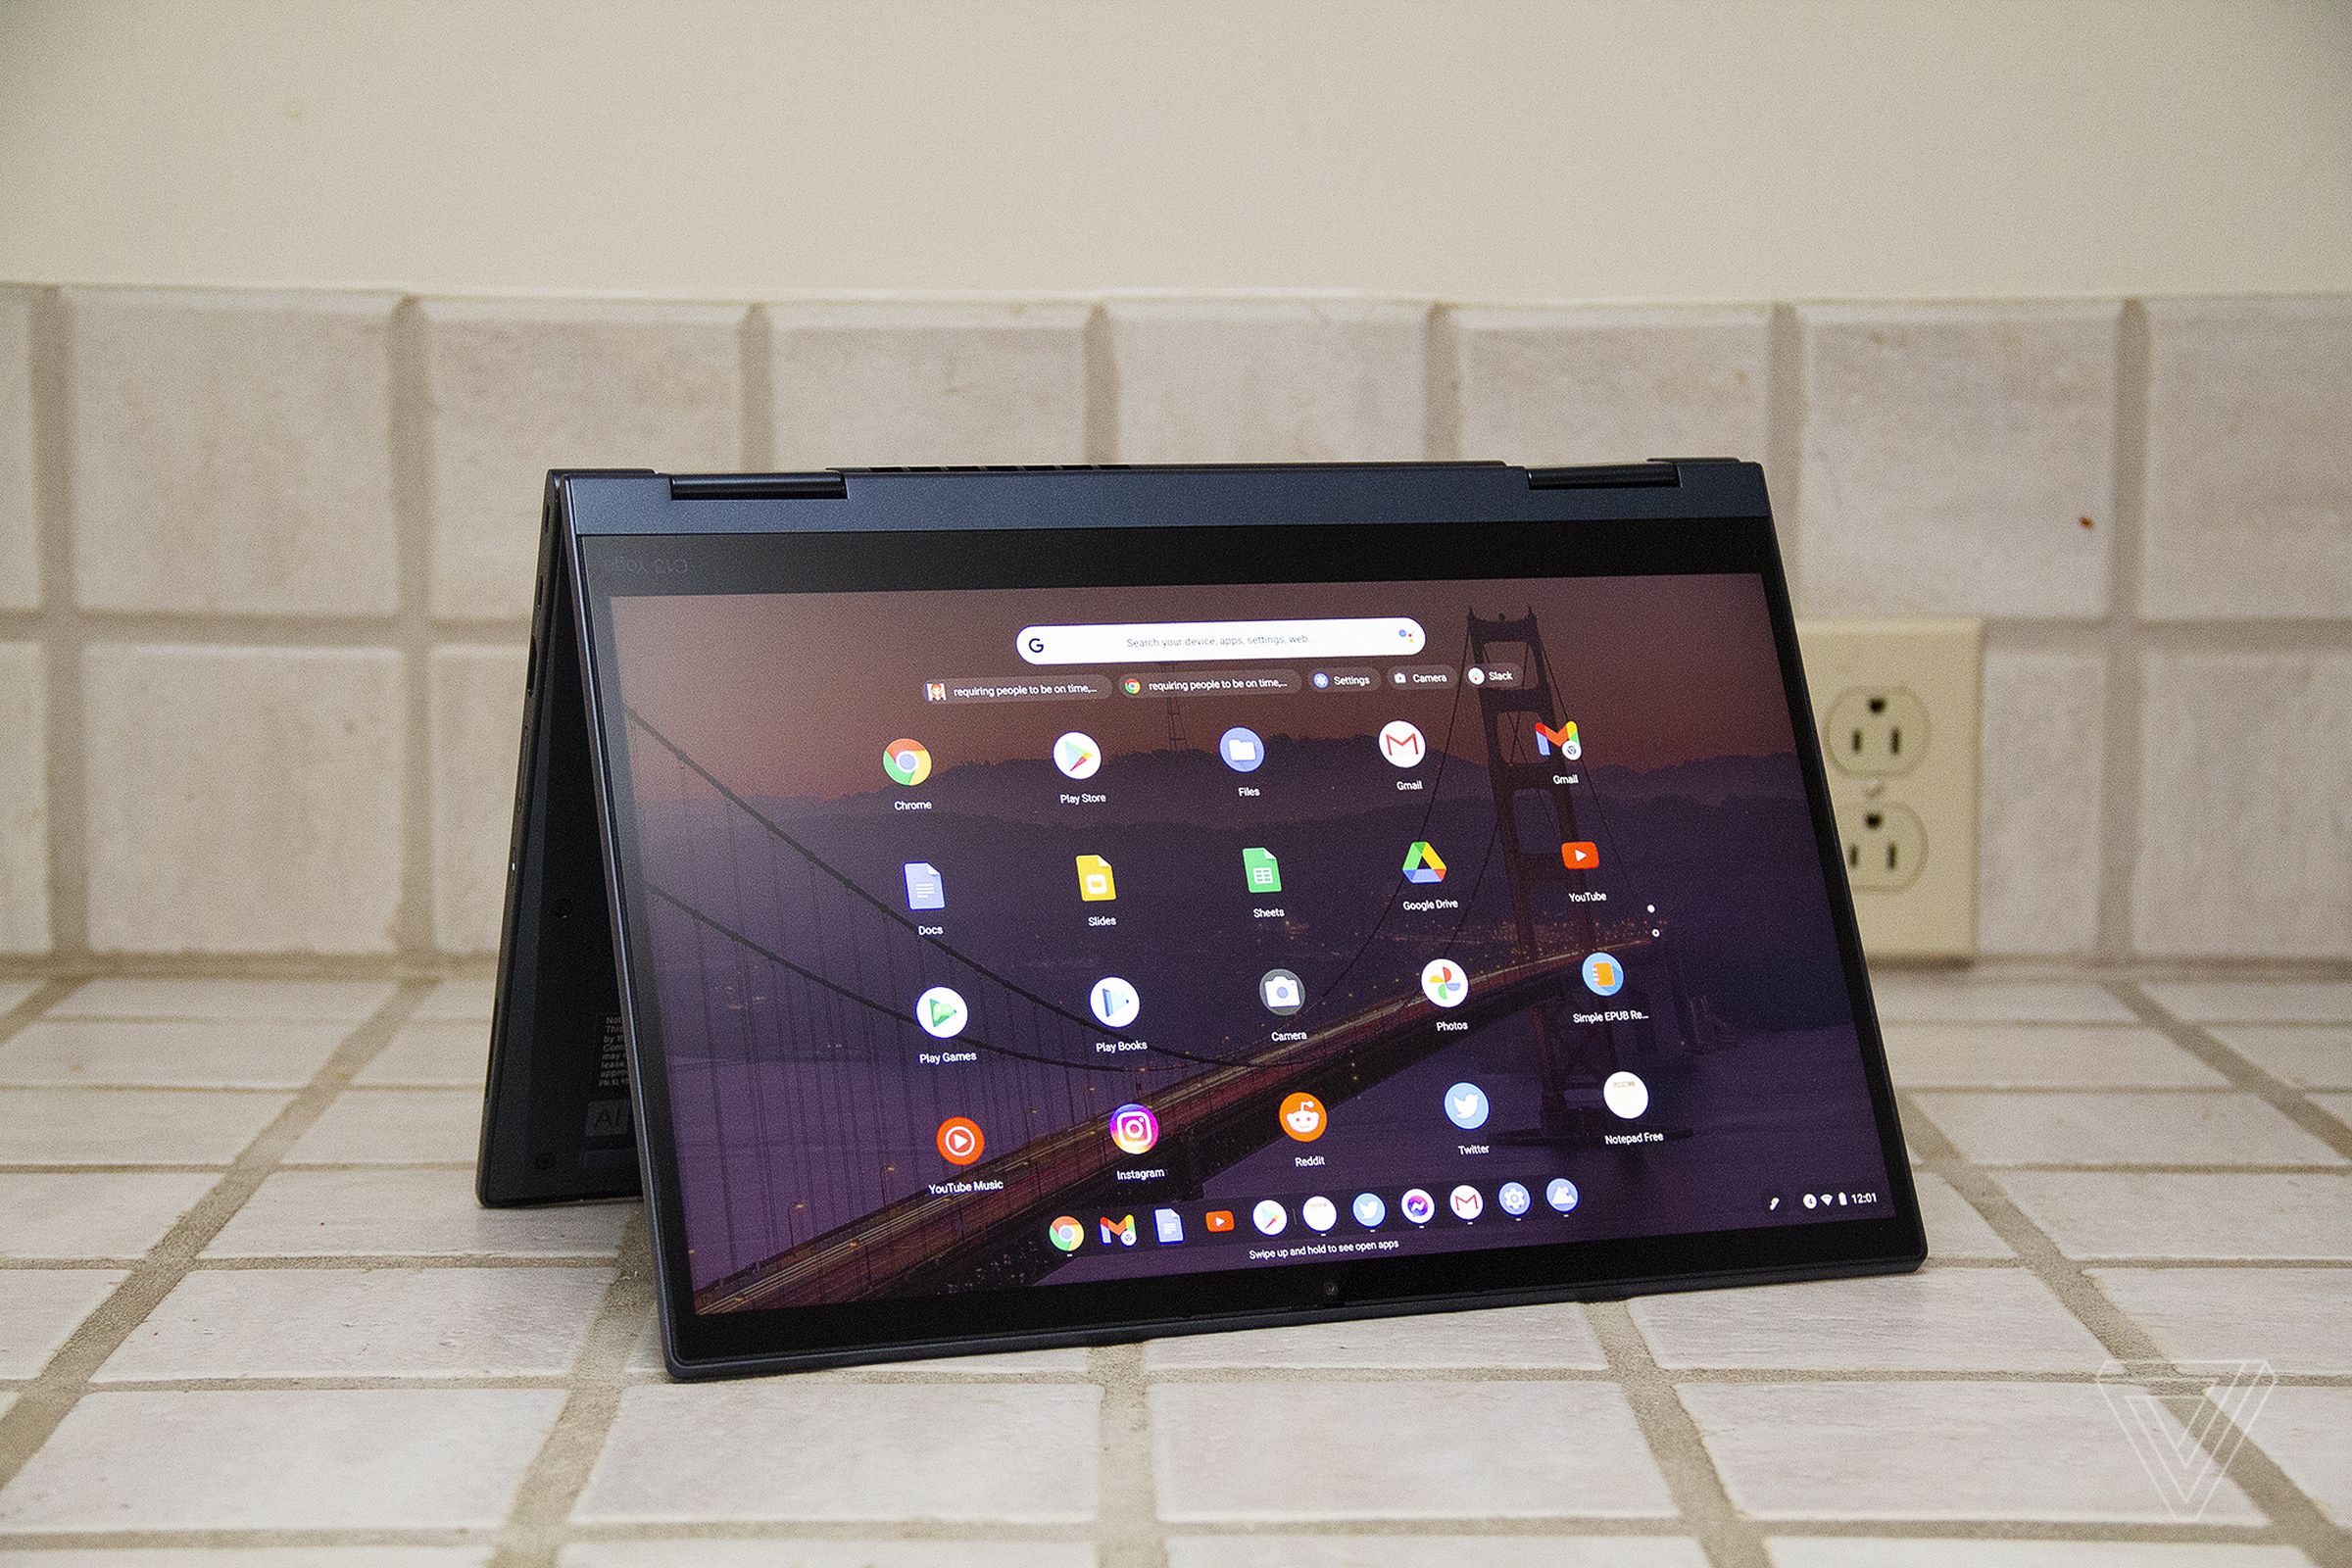 The ThinkPad C13 Yoga Chromebook in tent mode. The screen displays a grid of Android apps.